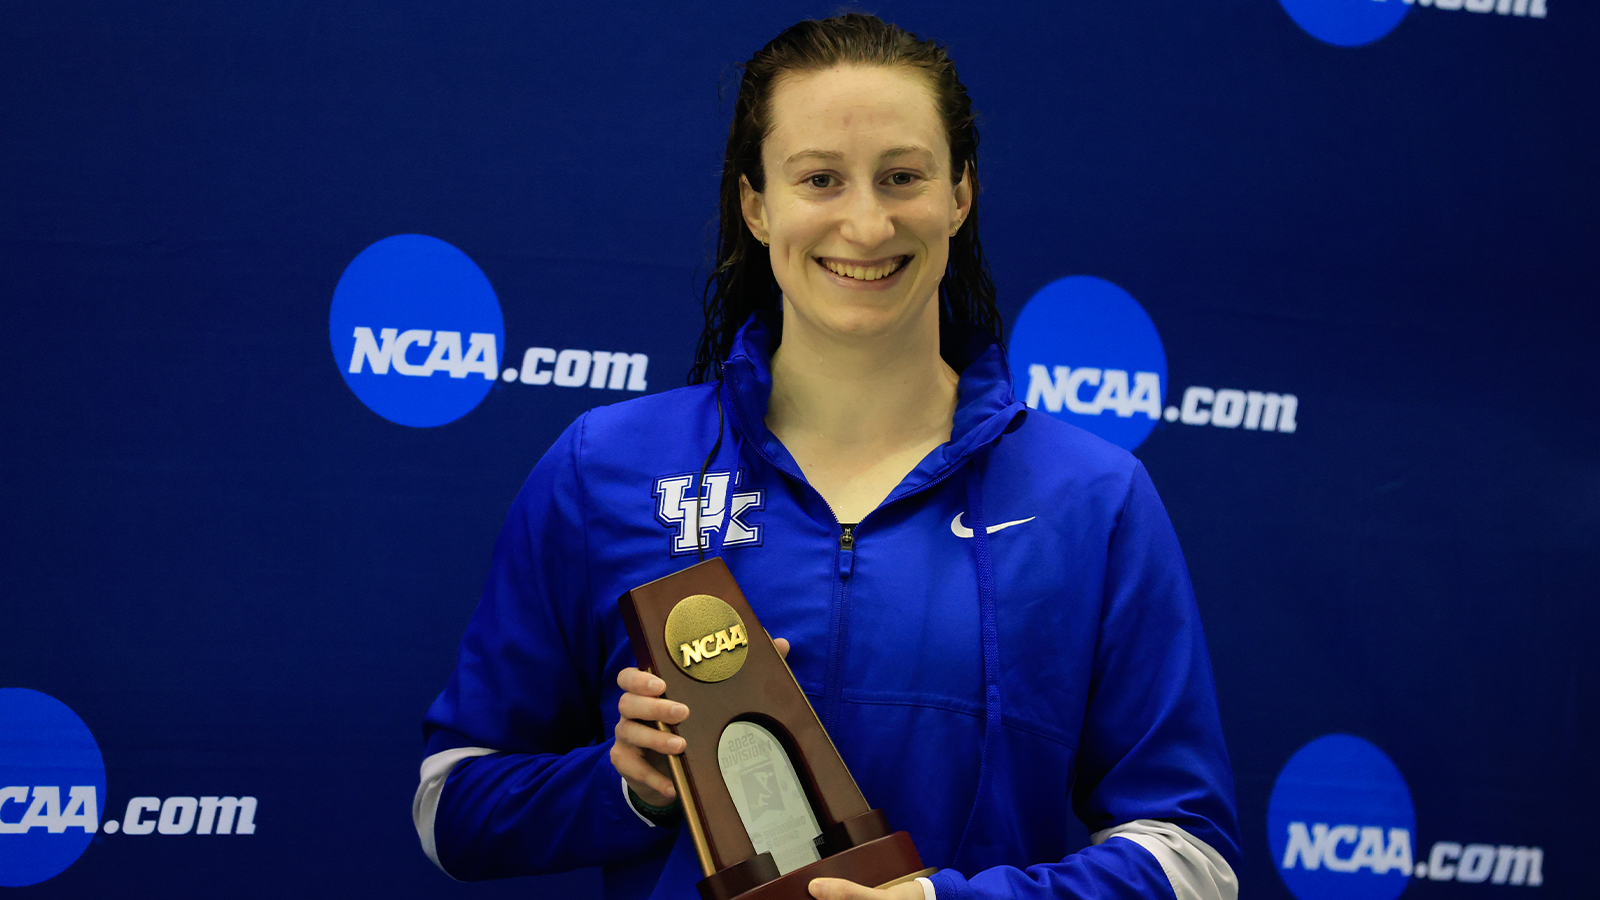 Davey Places Fifth in 200 Breast on Final Night of NCAA Championships